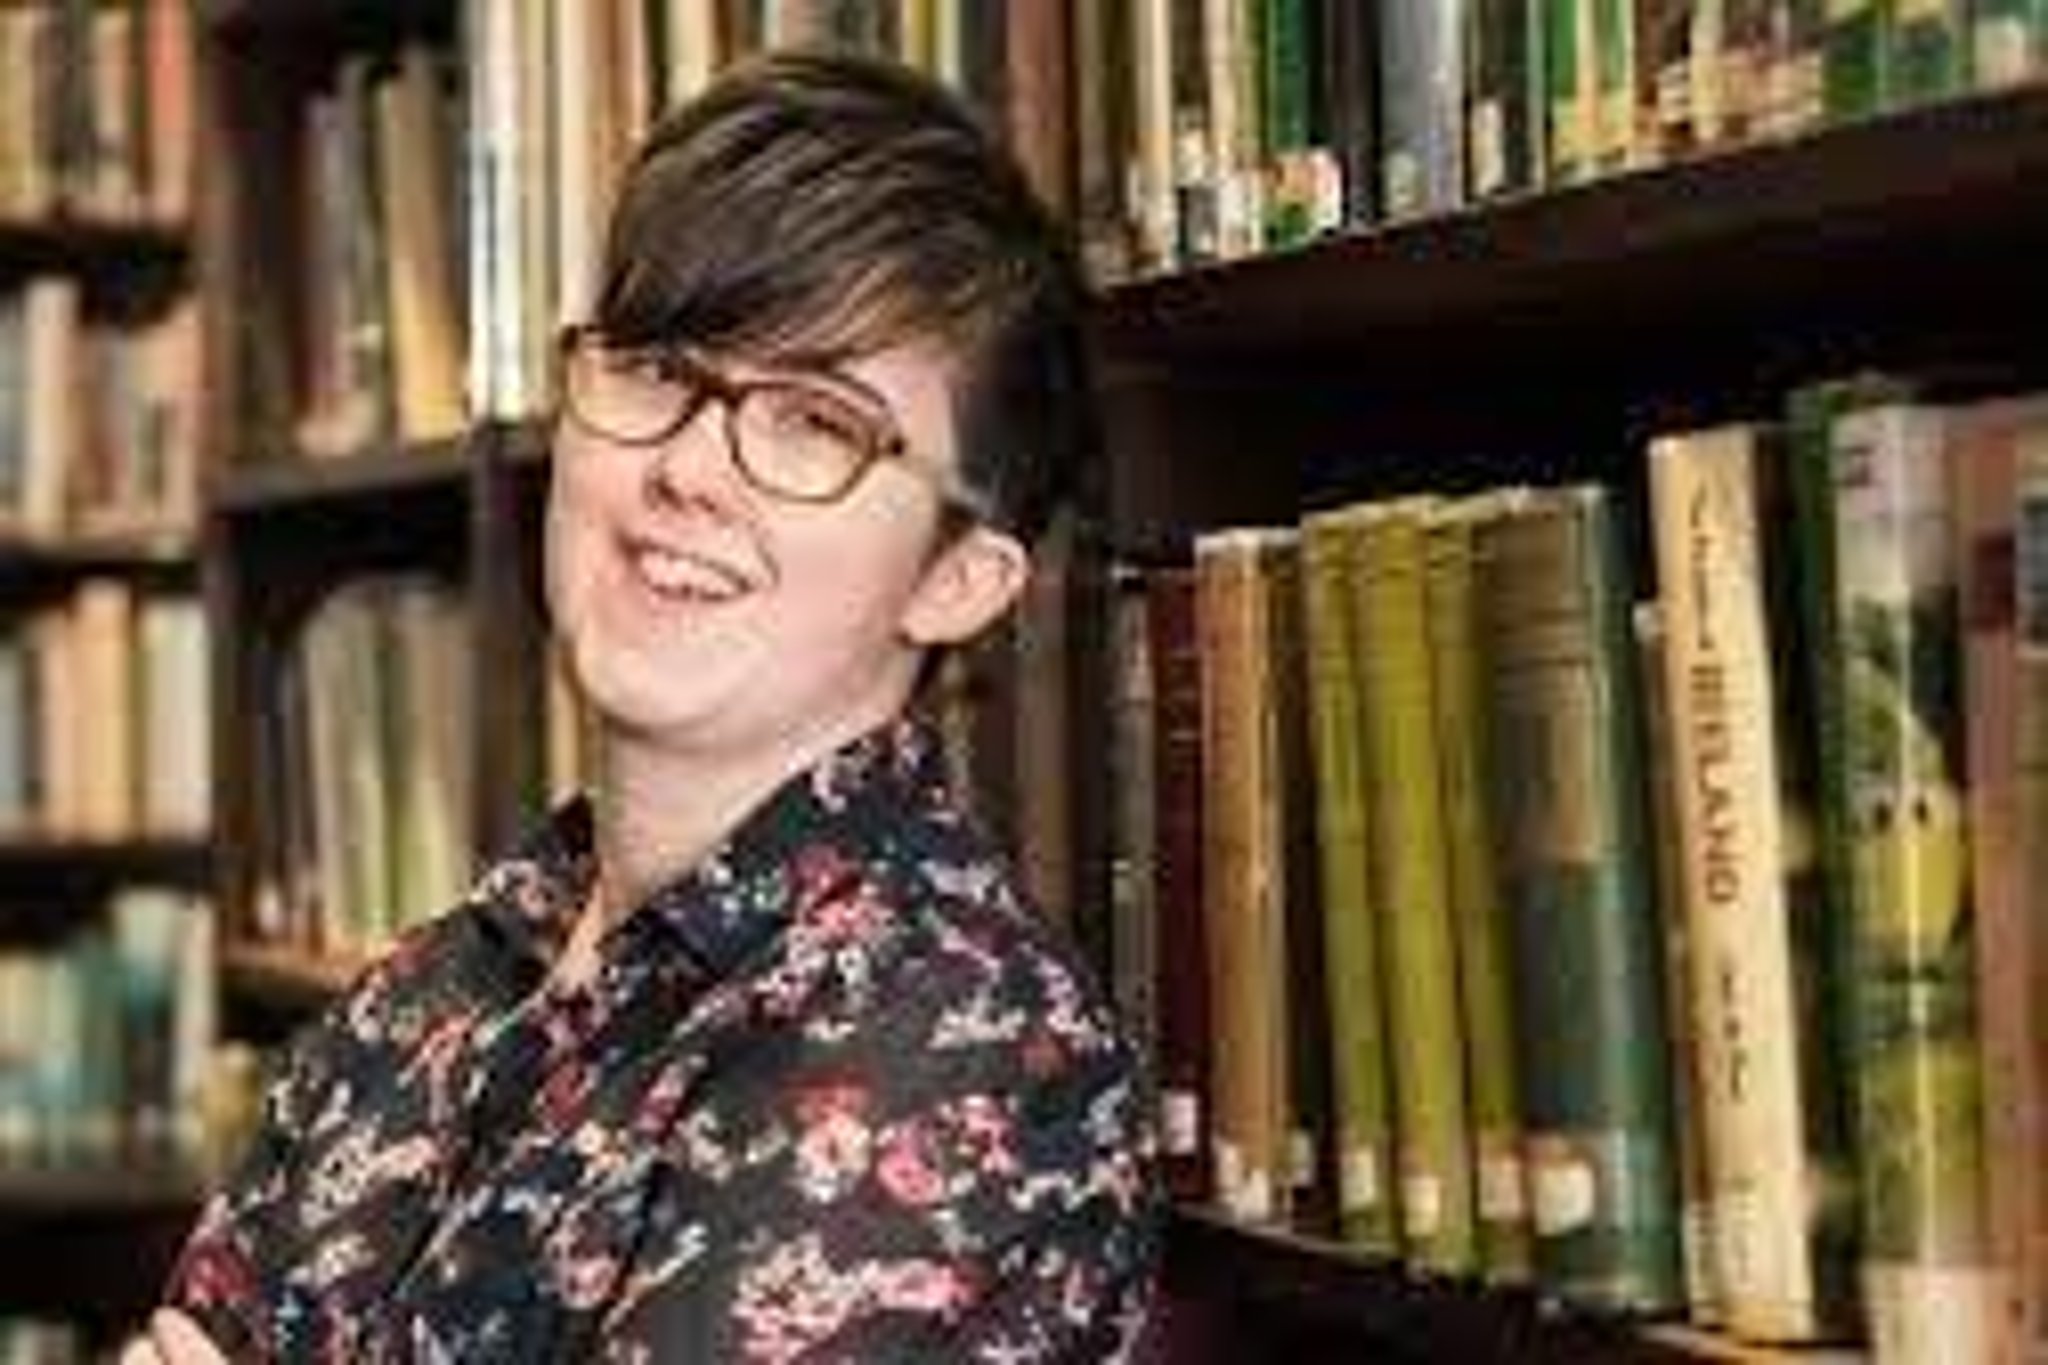 NUJ to host third anniversary vigil for murdered journalist Lyra McKee and 'renew call for her killers to be brought to justice'